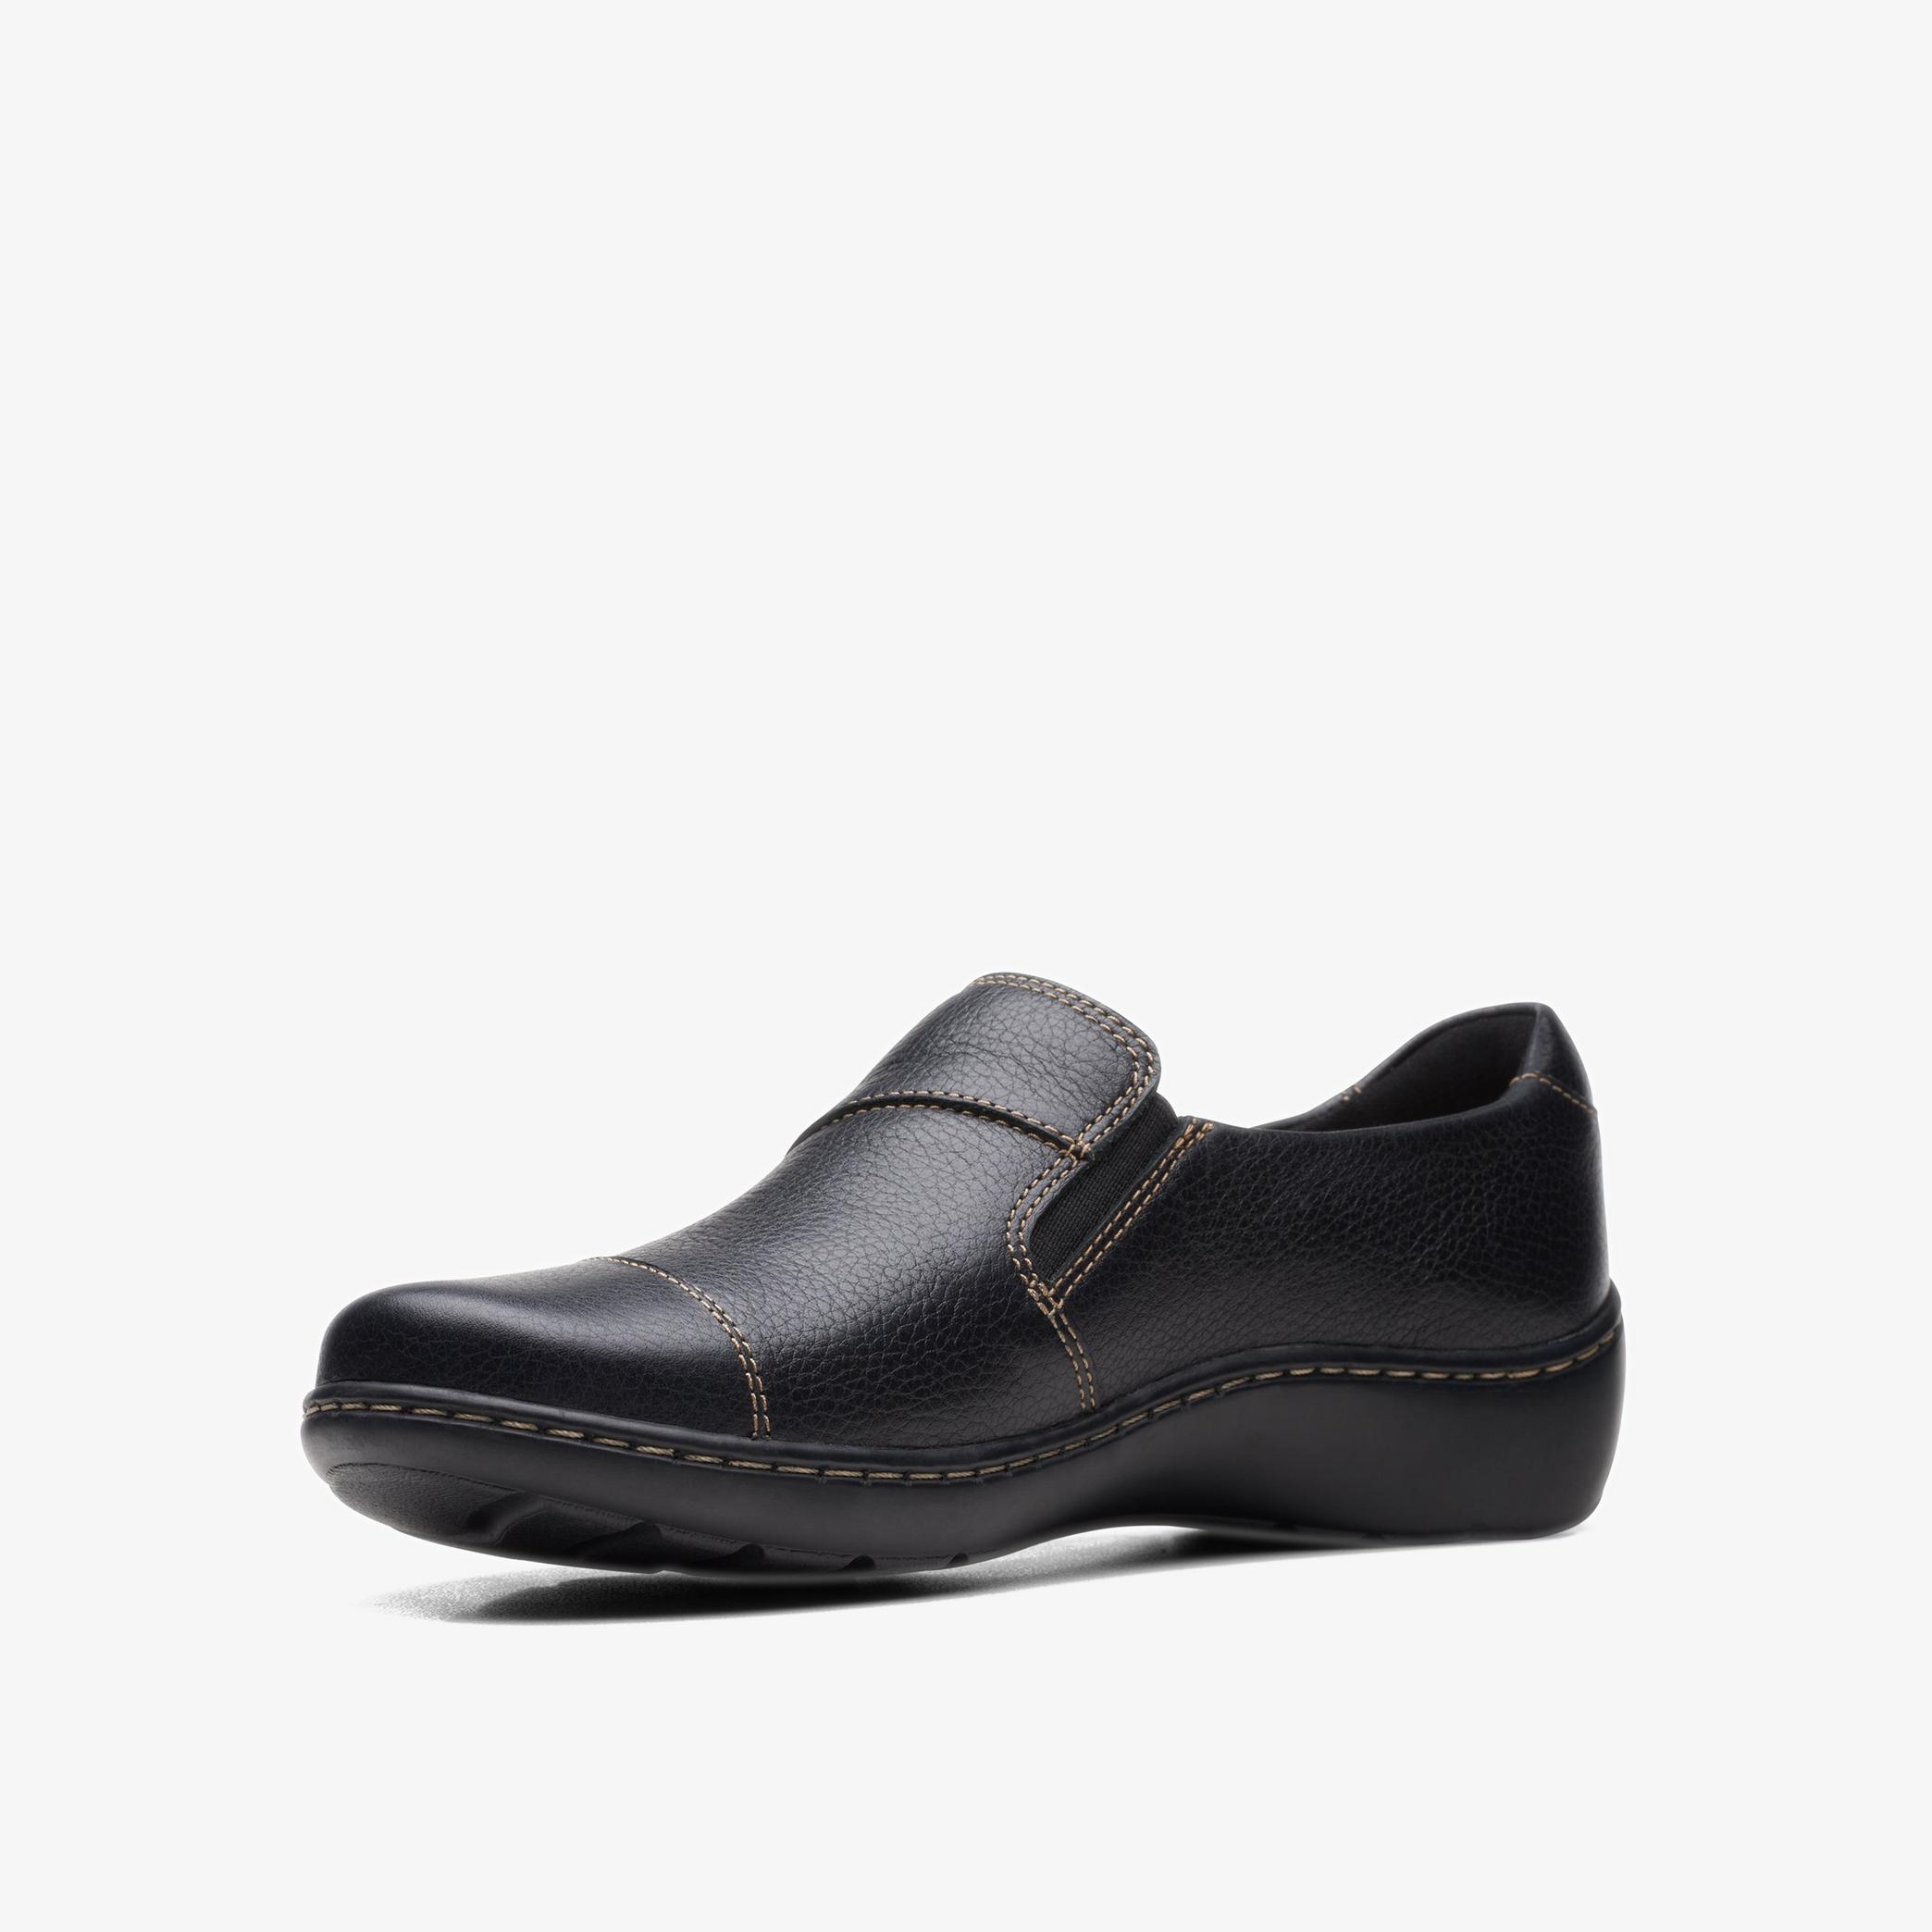 WOMENS Cora Harbor Black Leather Shoes | Clarks Outlet